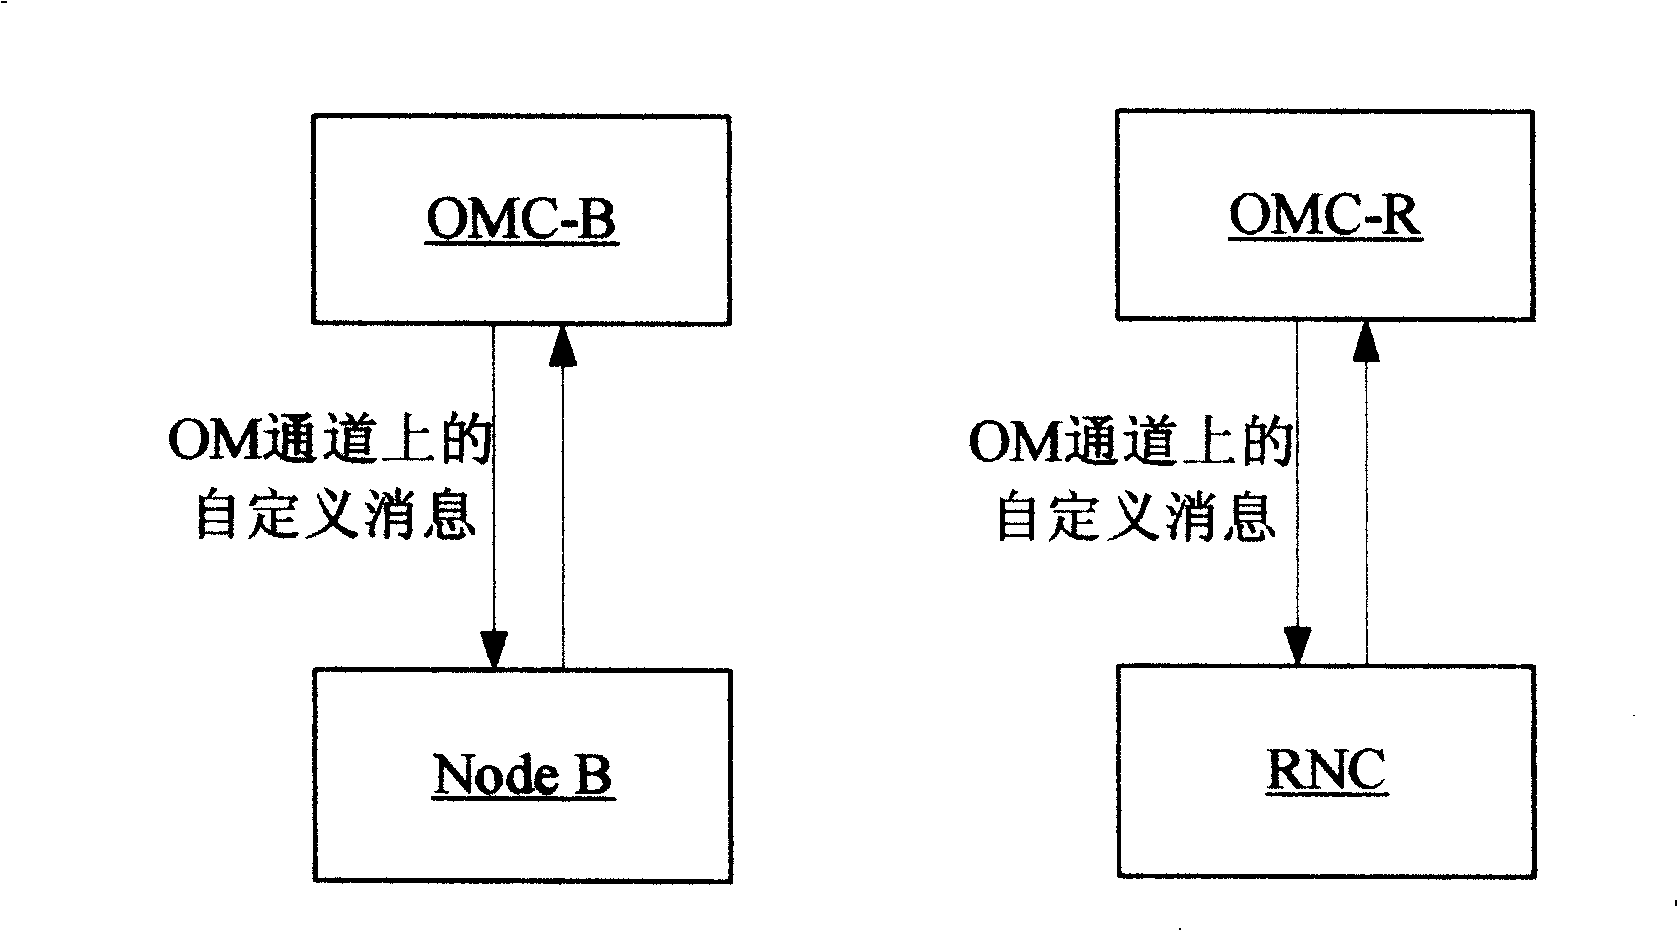 Node B simulated loading method under RNC centralized control